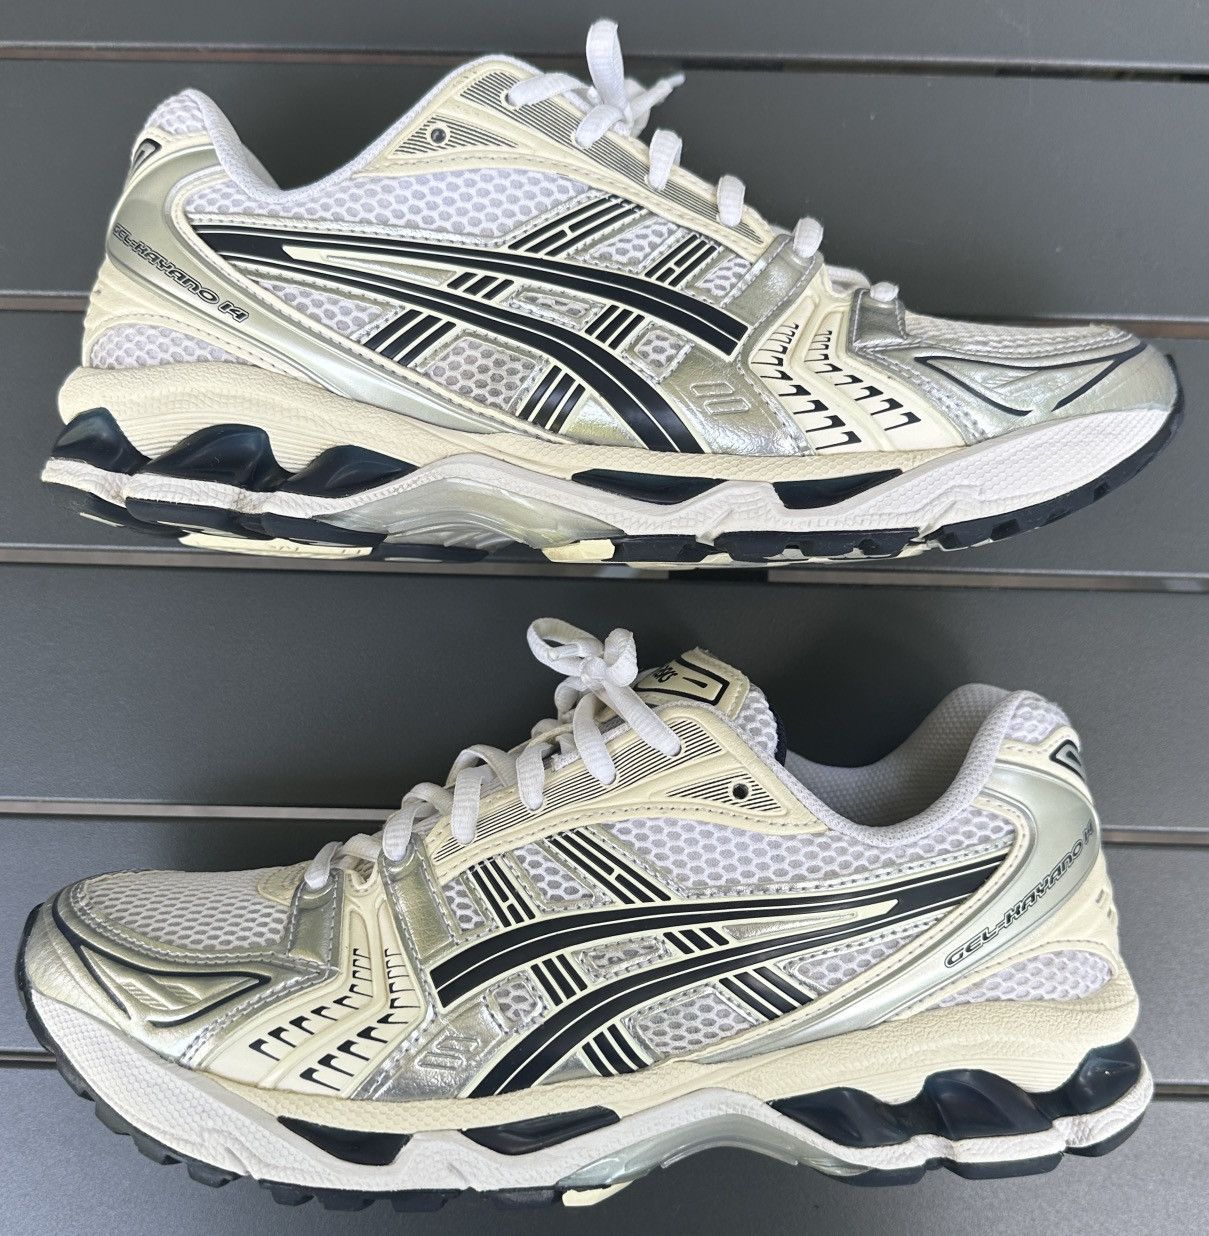 Pre-owned Asics Gel-kayano 14 White Midnight Navy Shoes